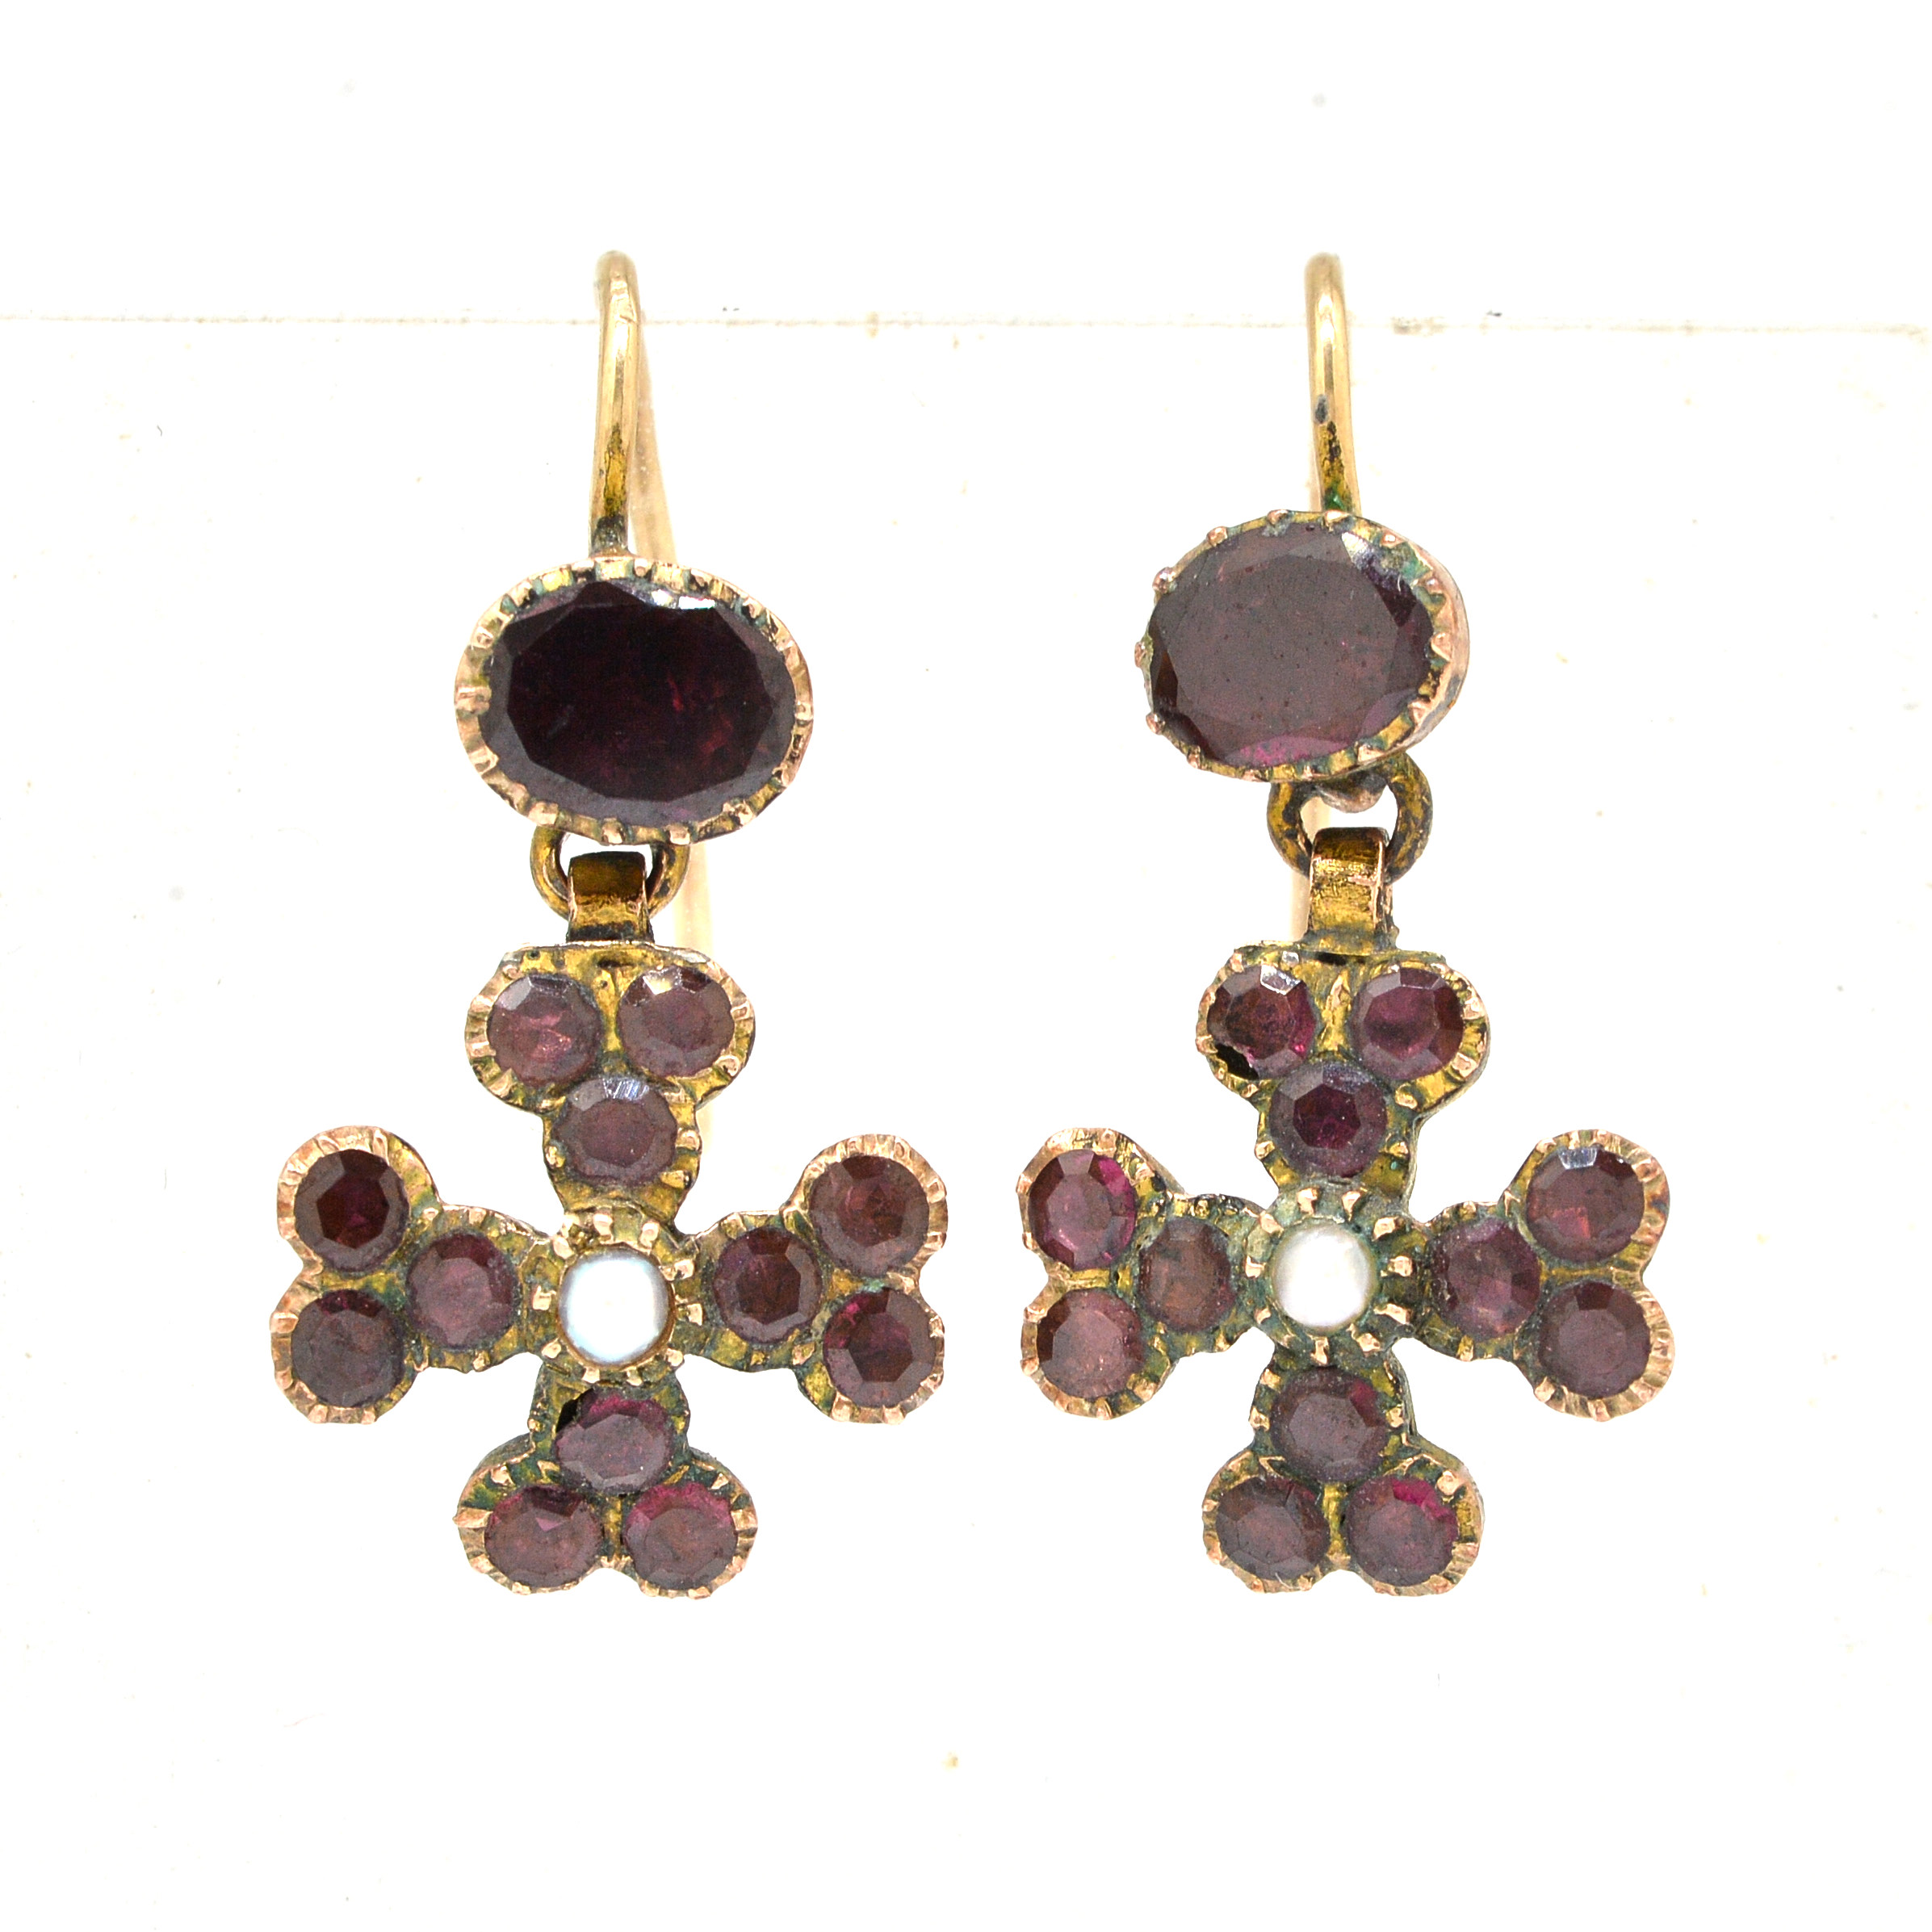 A PAIR OF GOLD, GARNET AND SEED PEARL EARRINGS